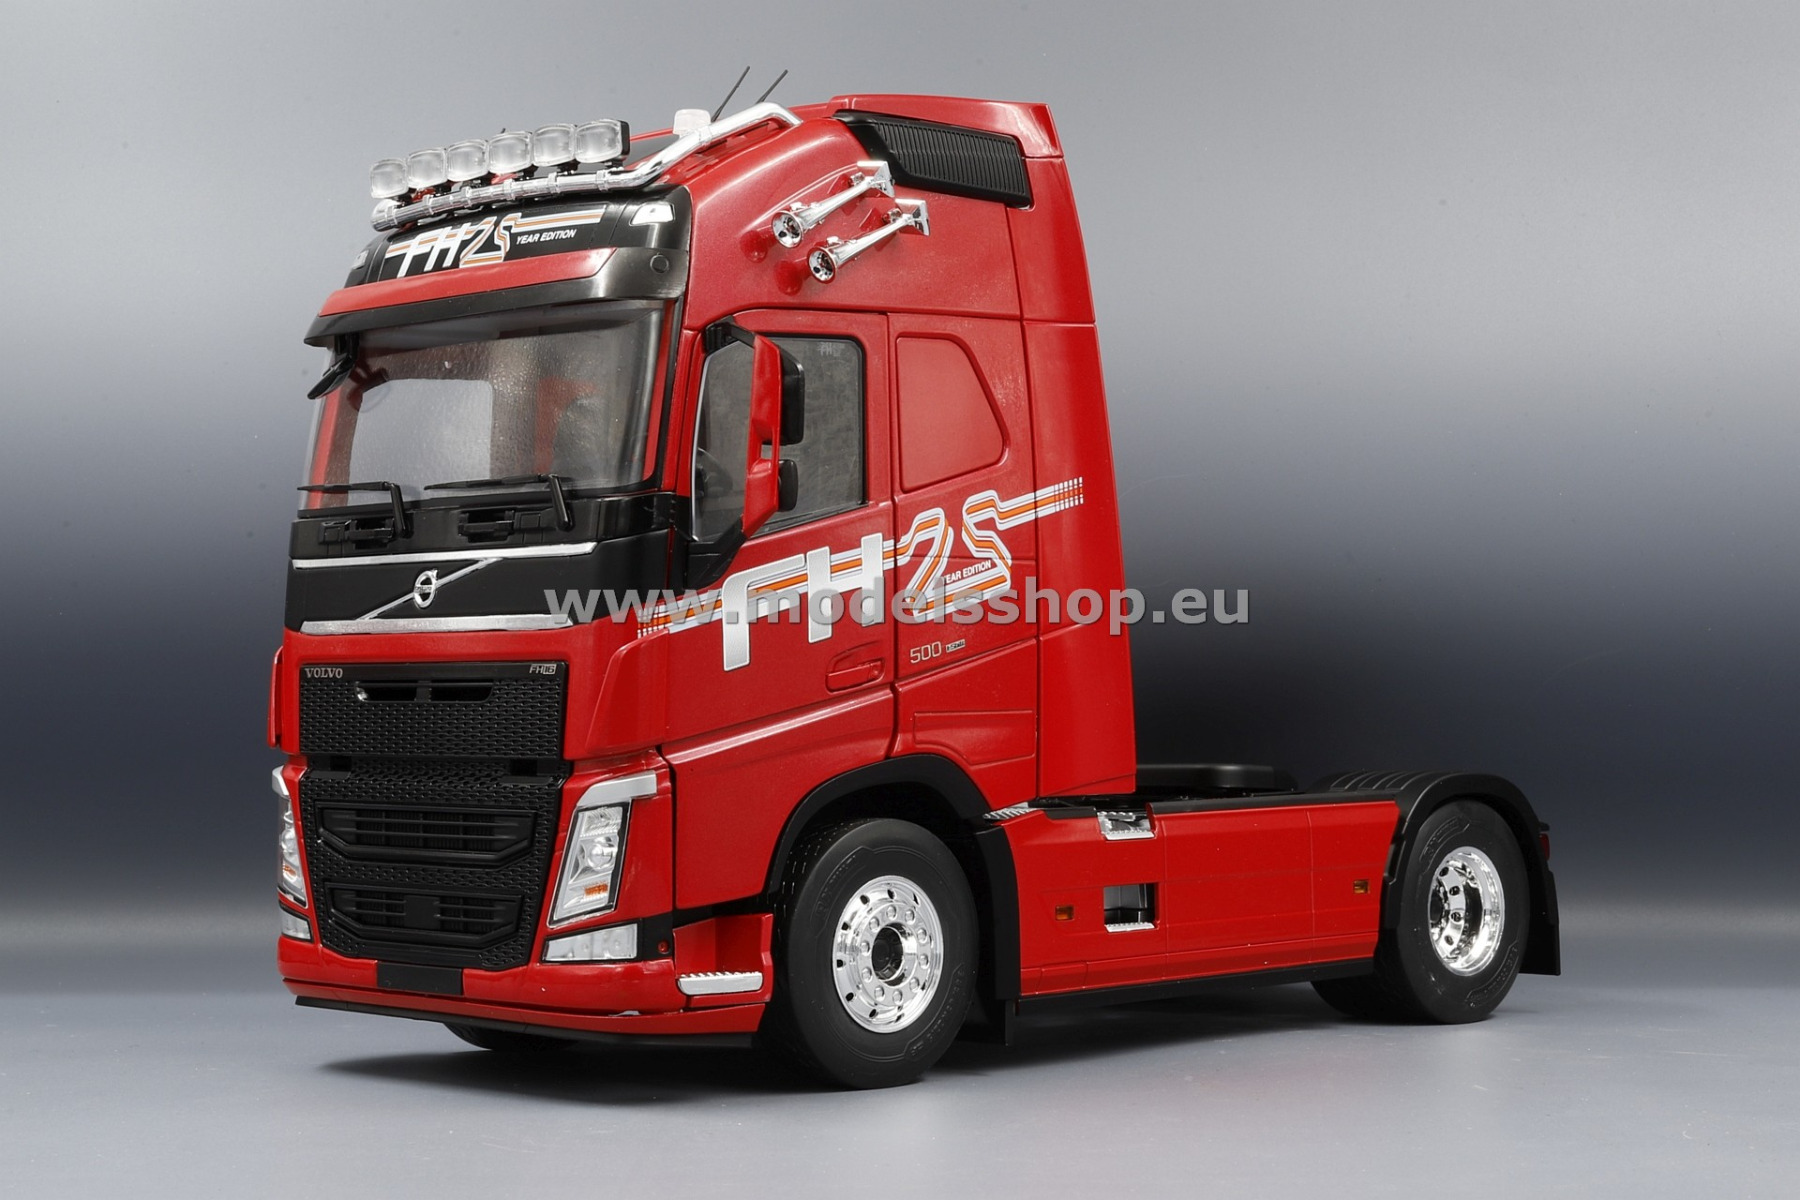 Volvo FH16 XL Cab tractor truck, 2018 /red - metallic/